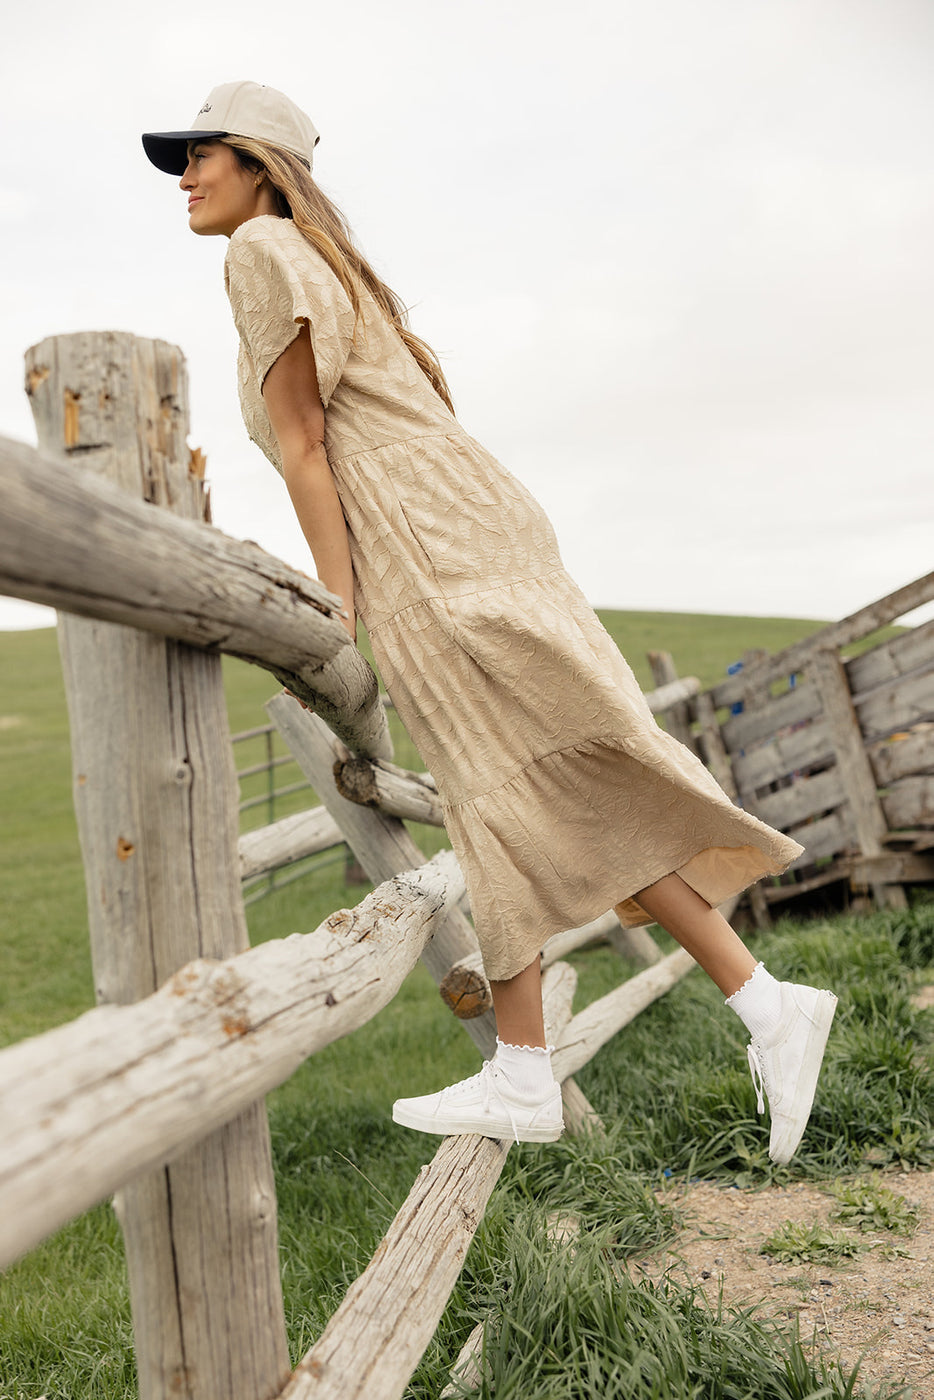 a woman in a dress and white shoes standing on a wooden fence